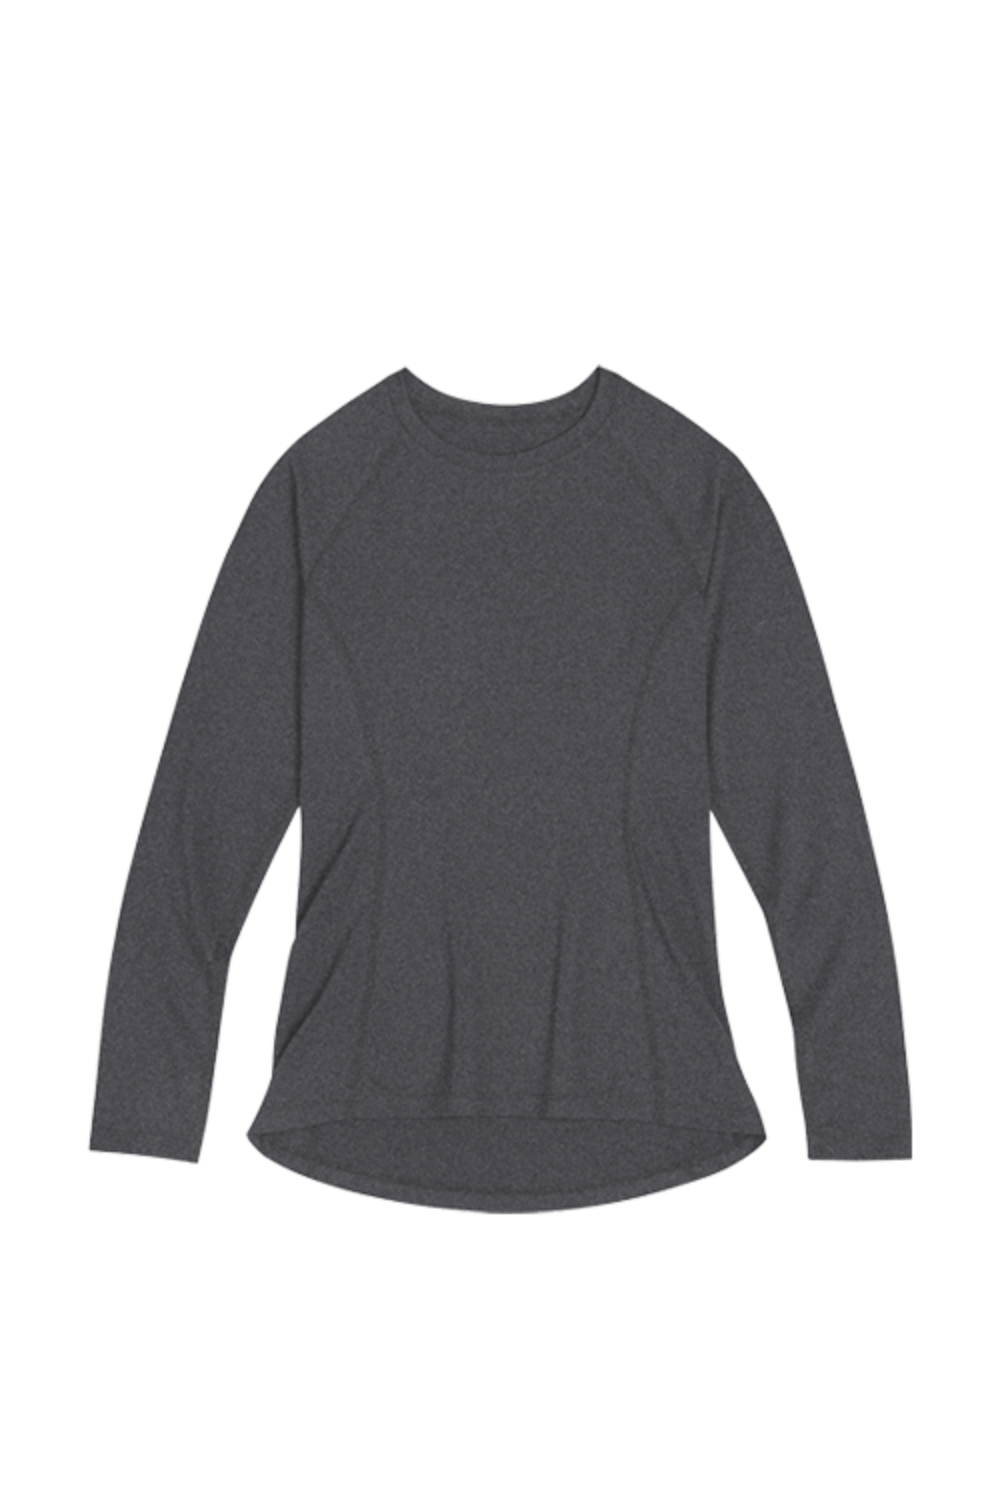 Airtouch Pace Long Sleeve